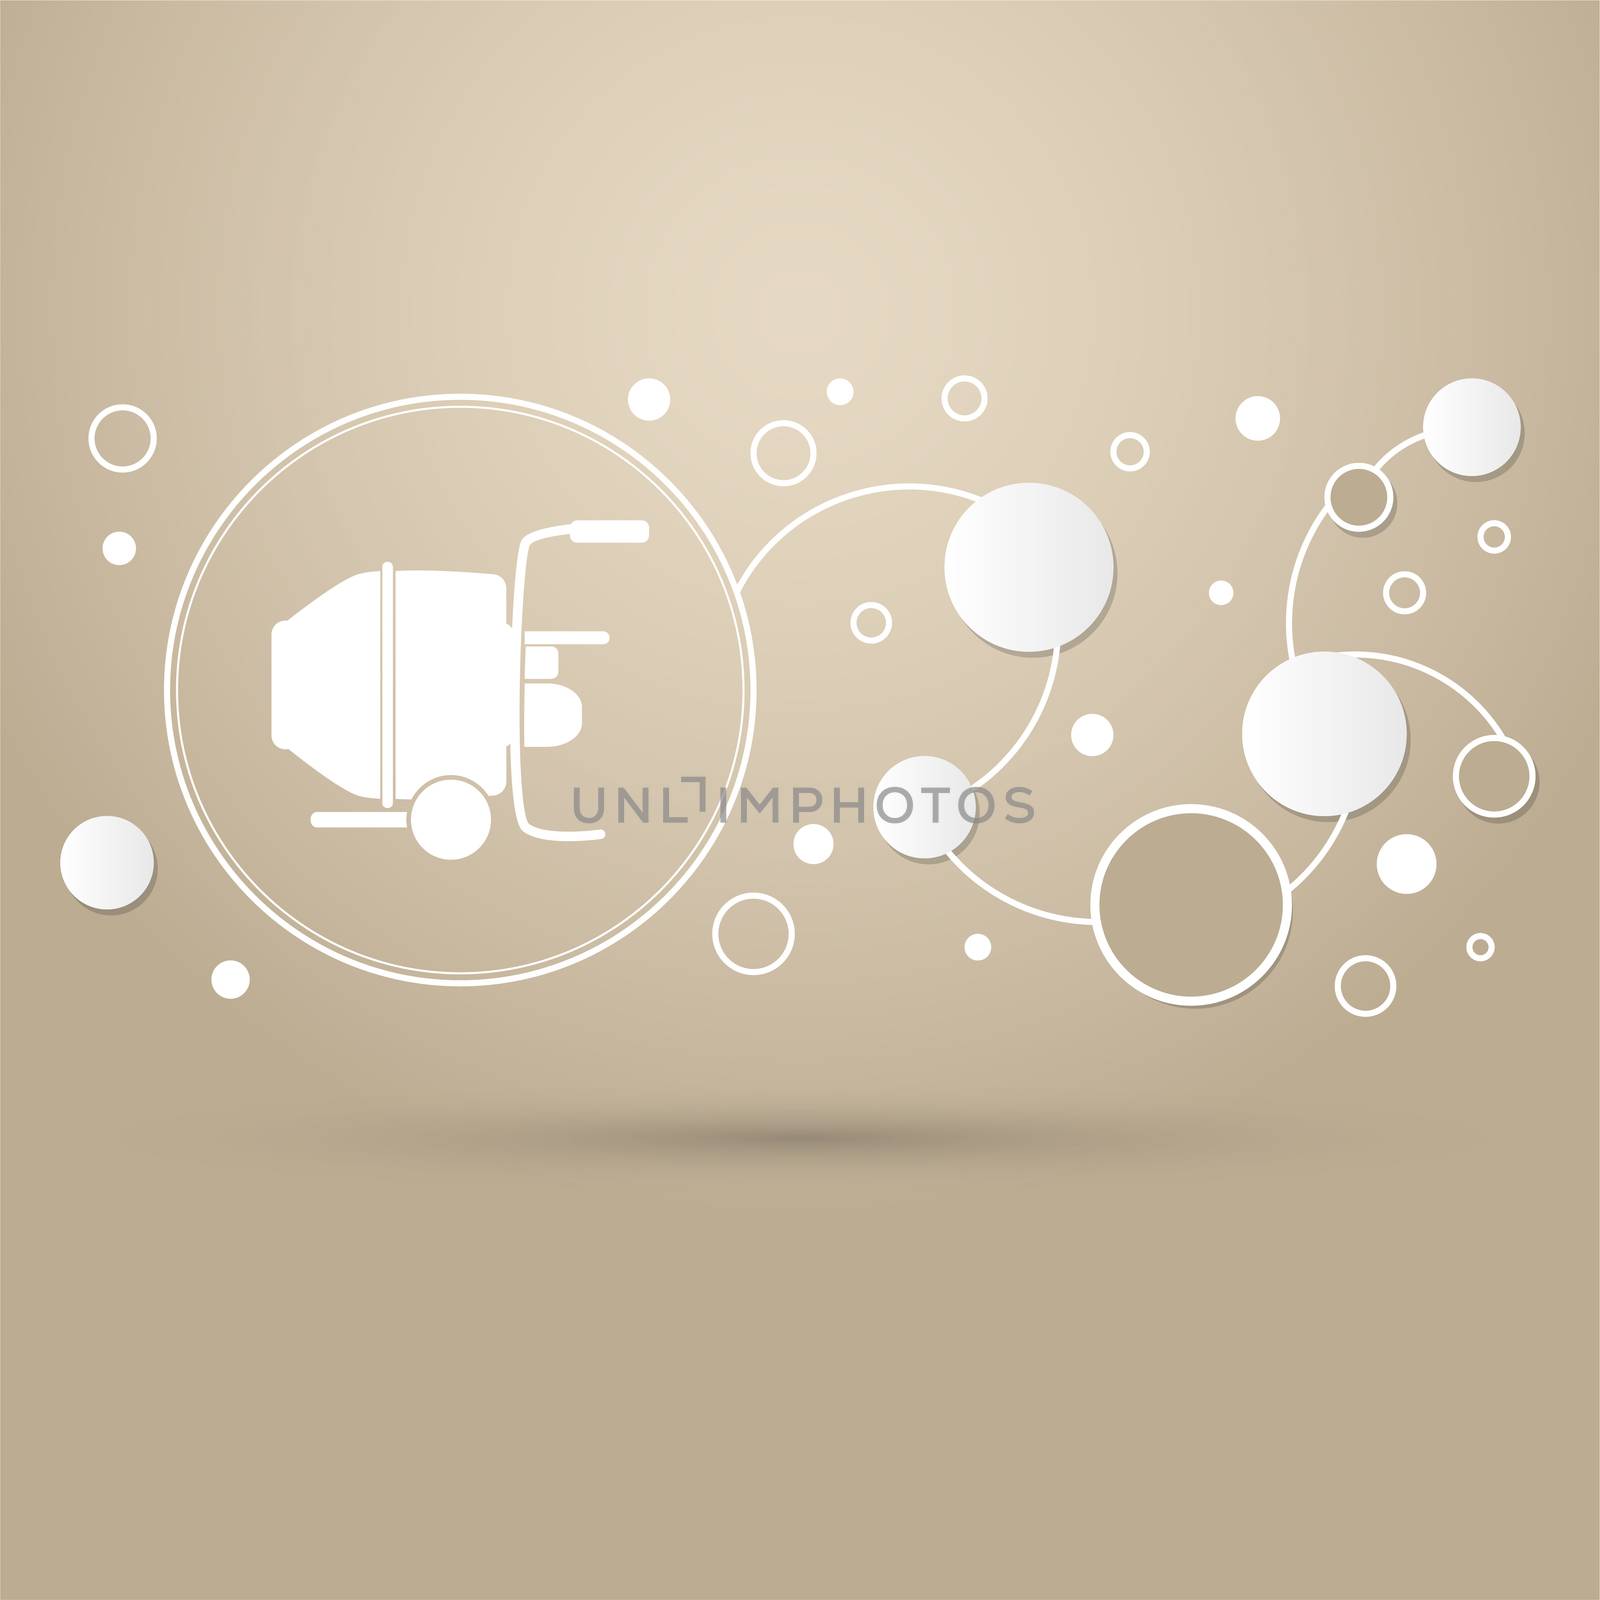 Concrete mixer icon on a brown background with elegant style and modern design infographic.  by Adamchuk